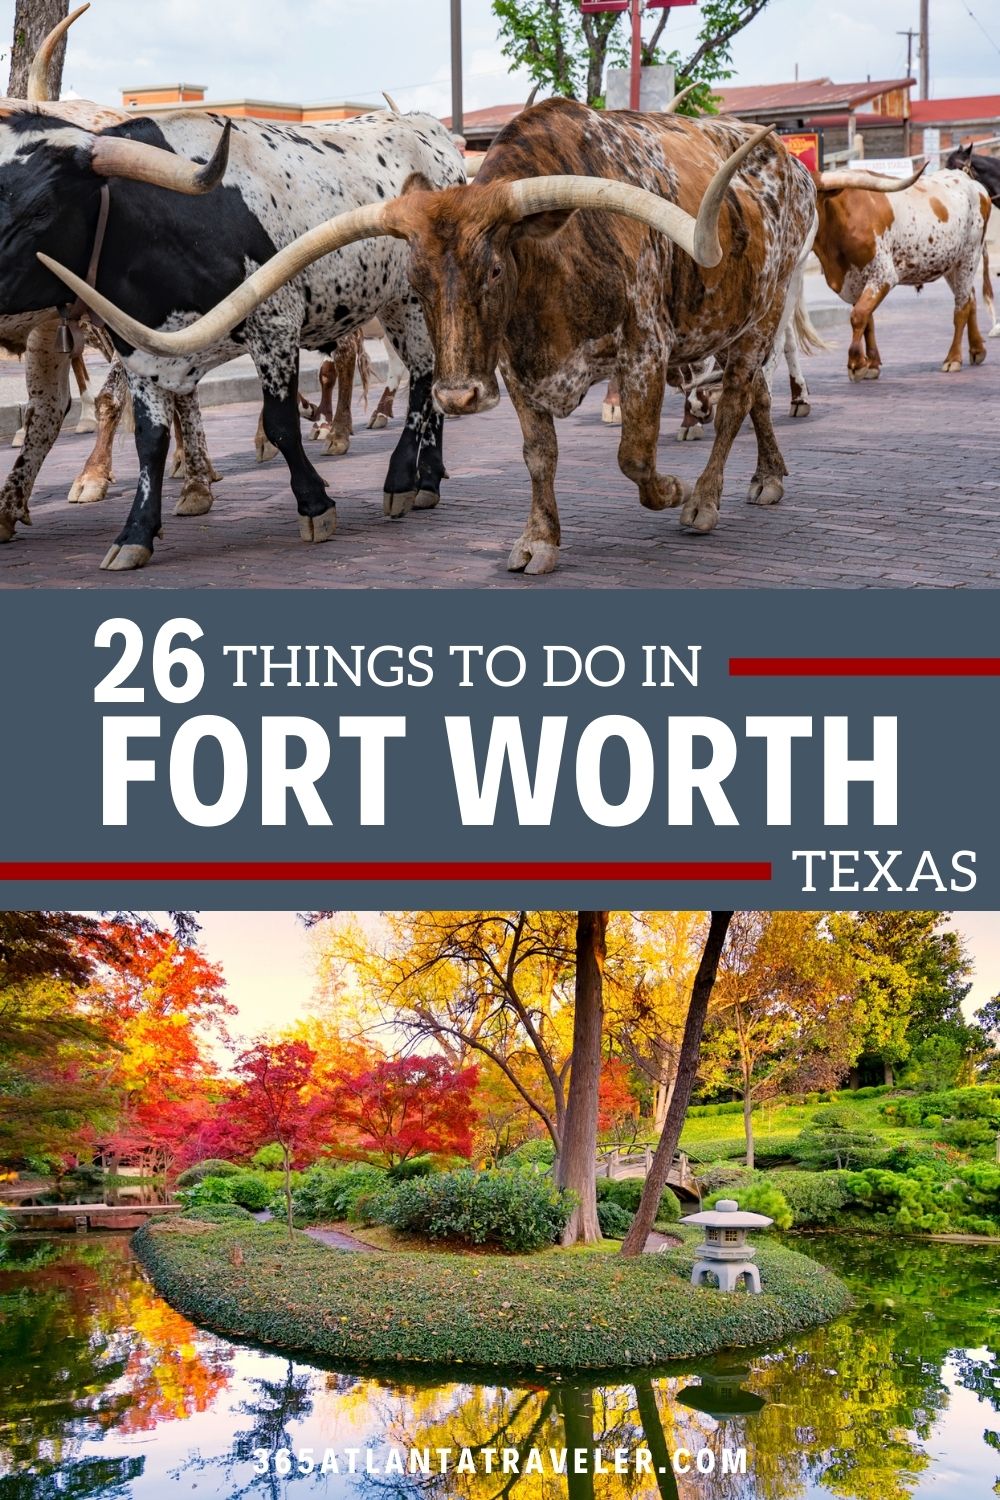 26 OUTSTANDING THINGS TO DO IN FORT WORTH, TEXAS